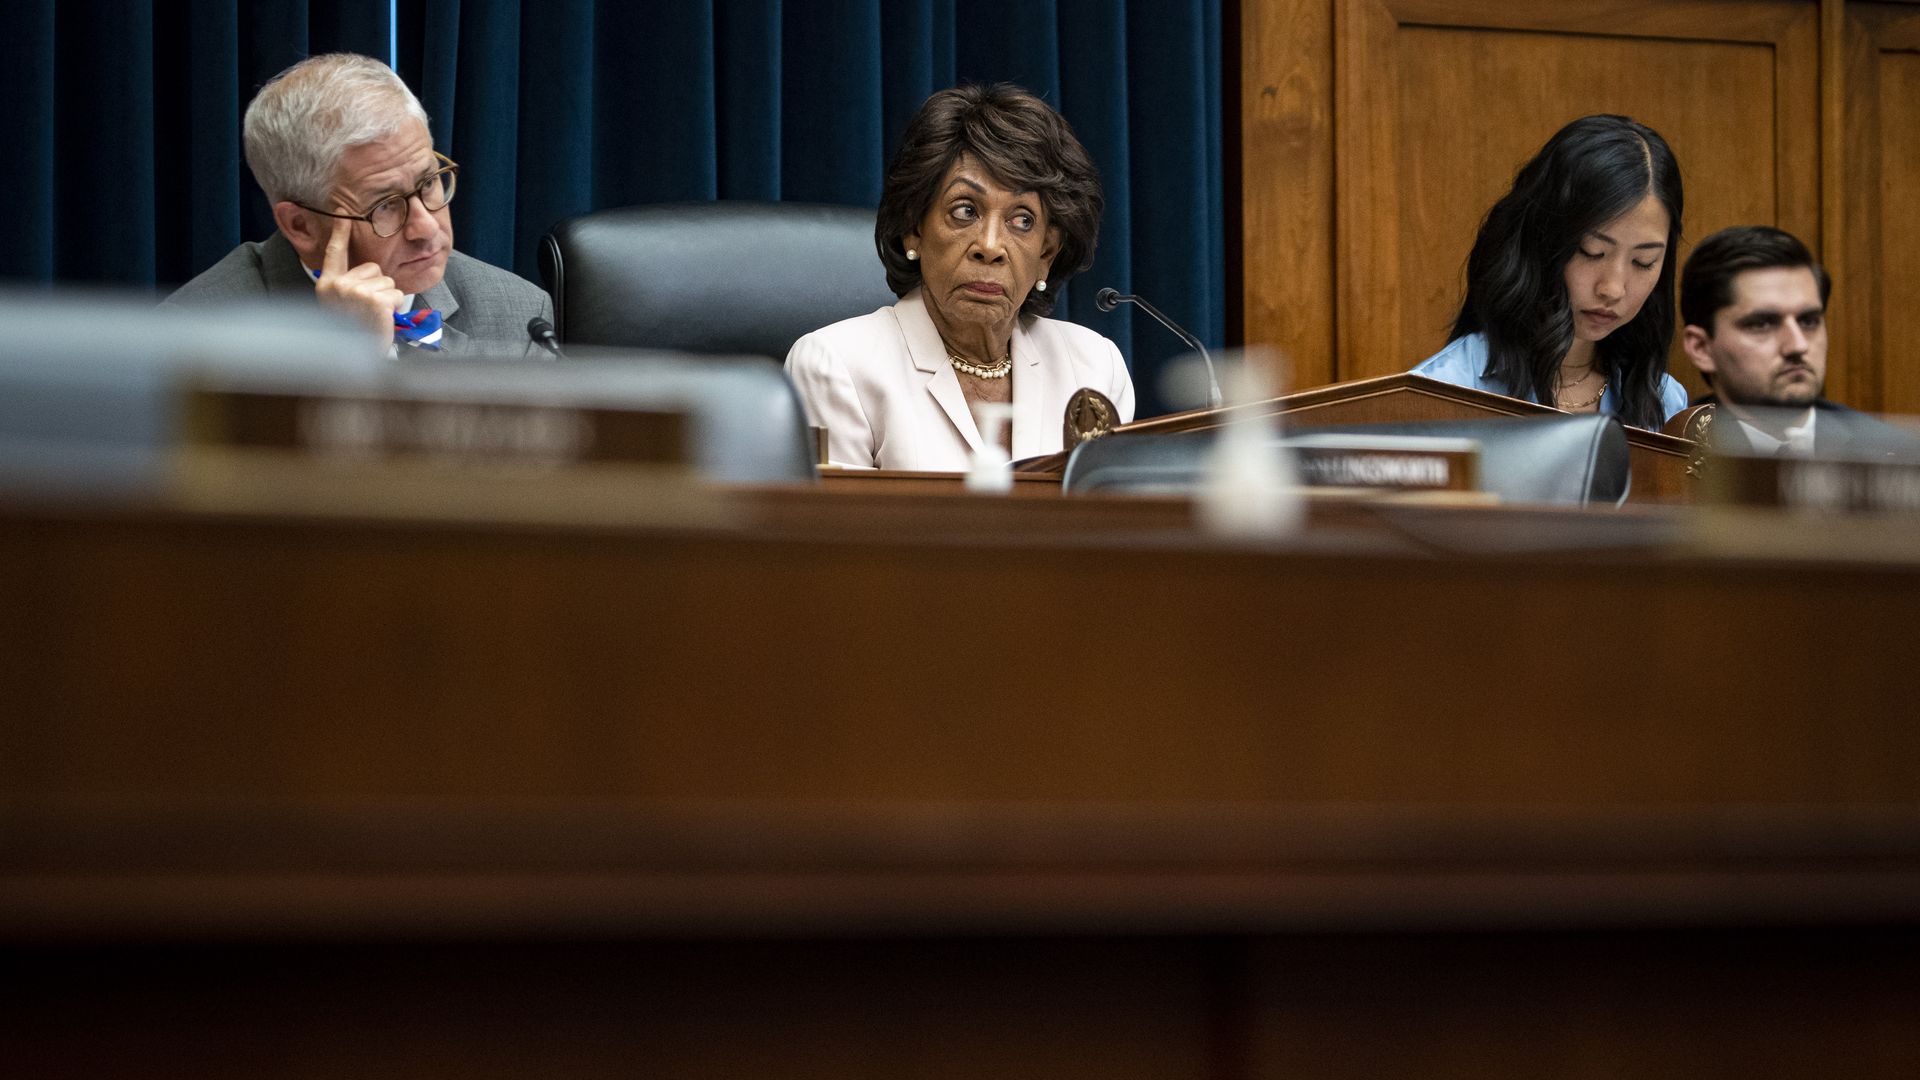 Reps. Patrick McHenry, wearing a grey suit and blue bowtie, and Maxine Waters, wearing a white pantsuit and pearl necklace, sit behind the dais at a Financial Services Committee hearing.  